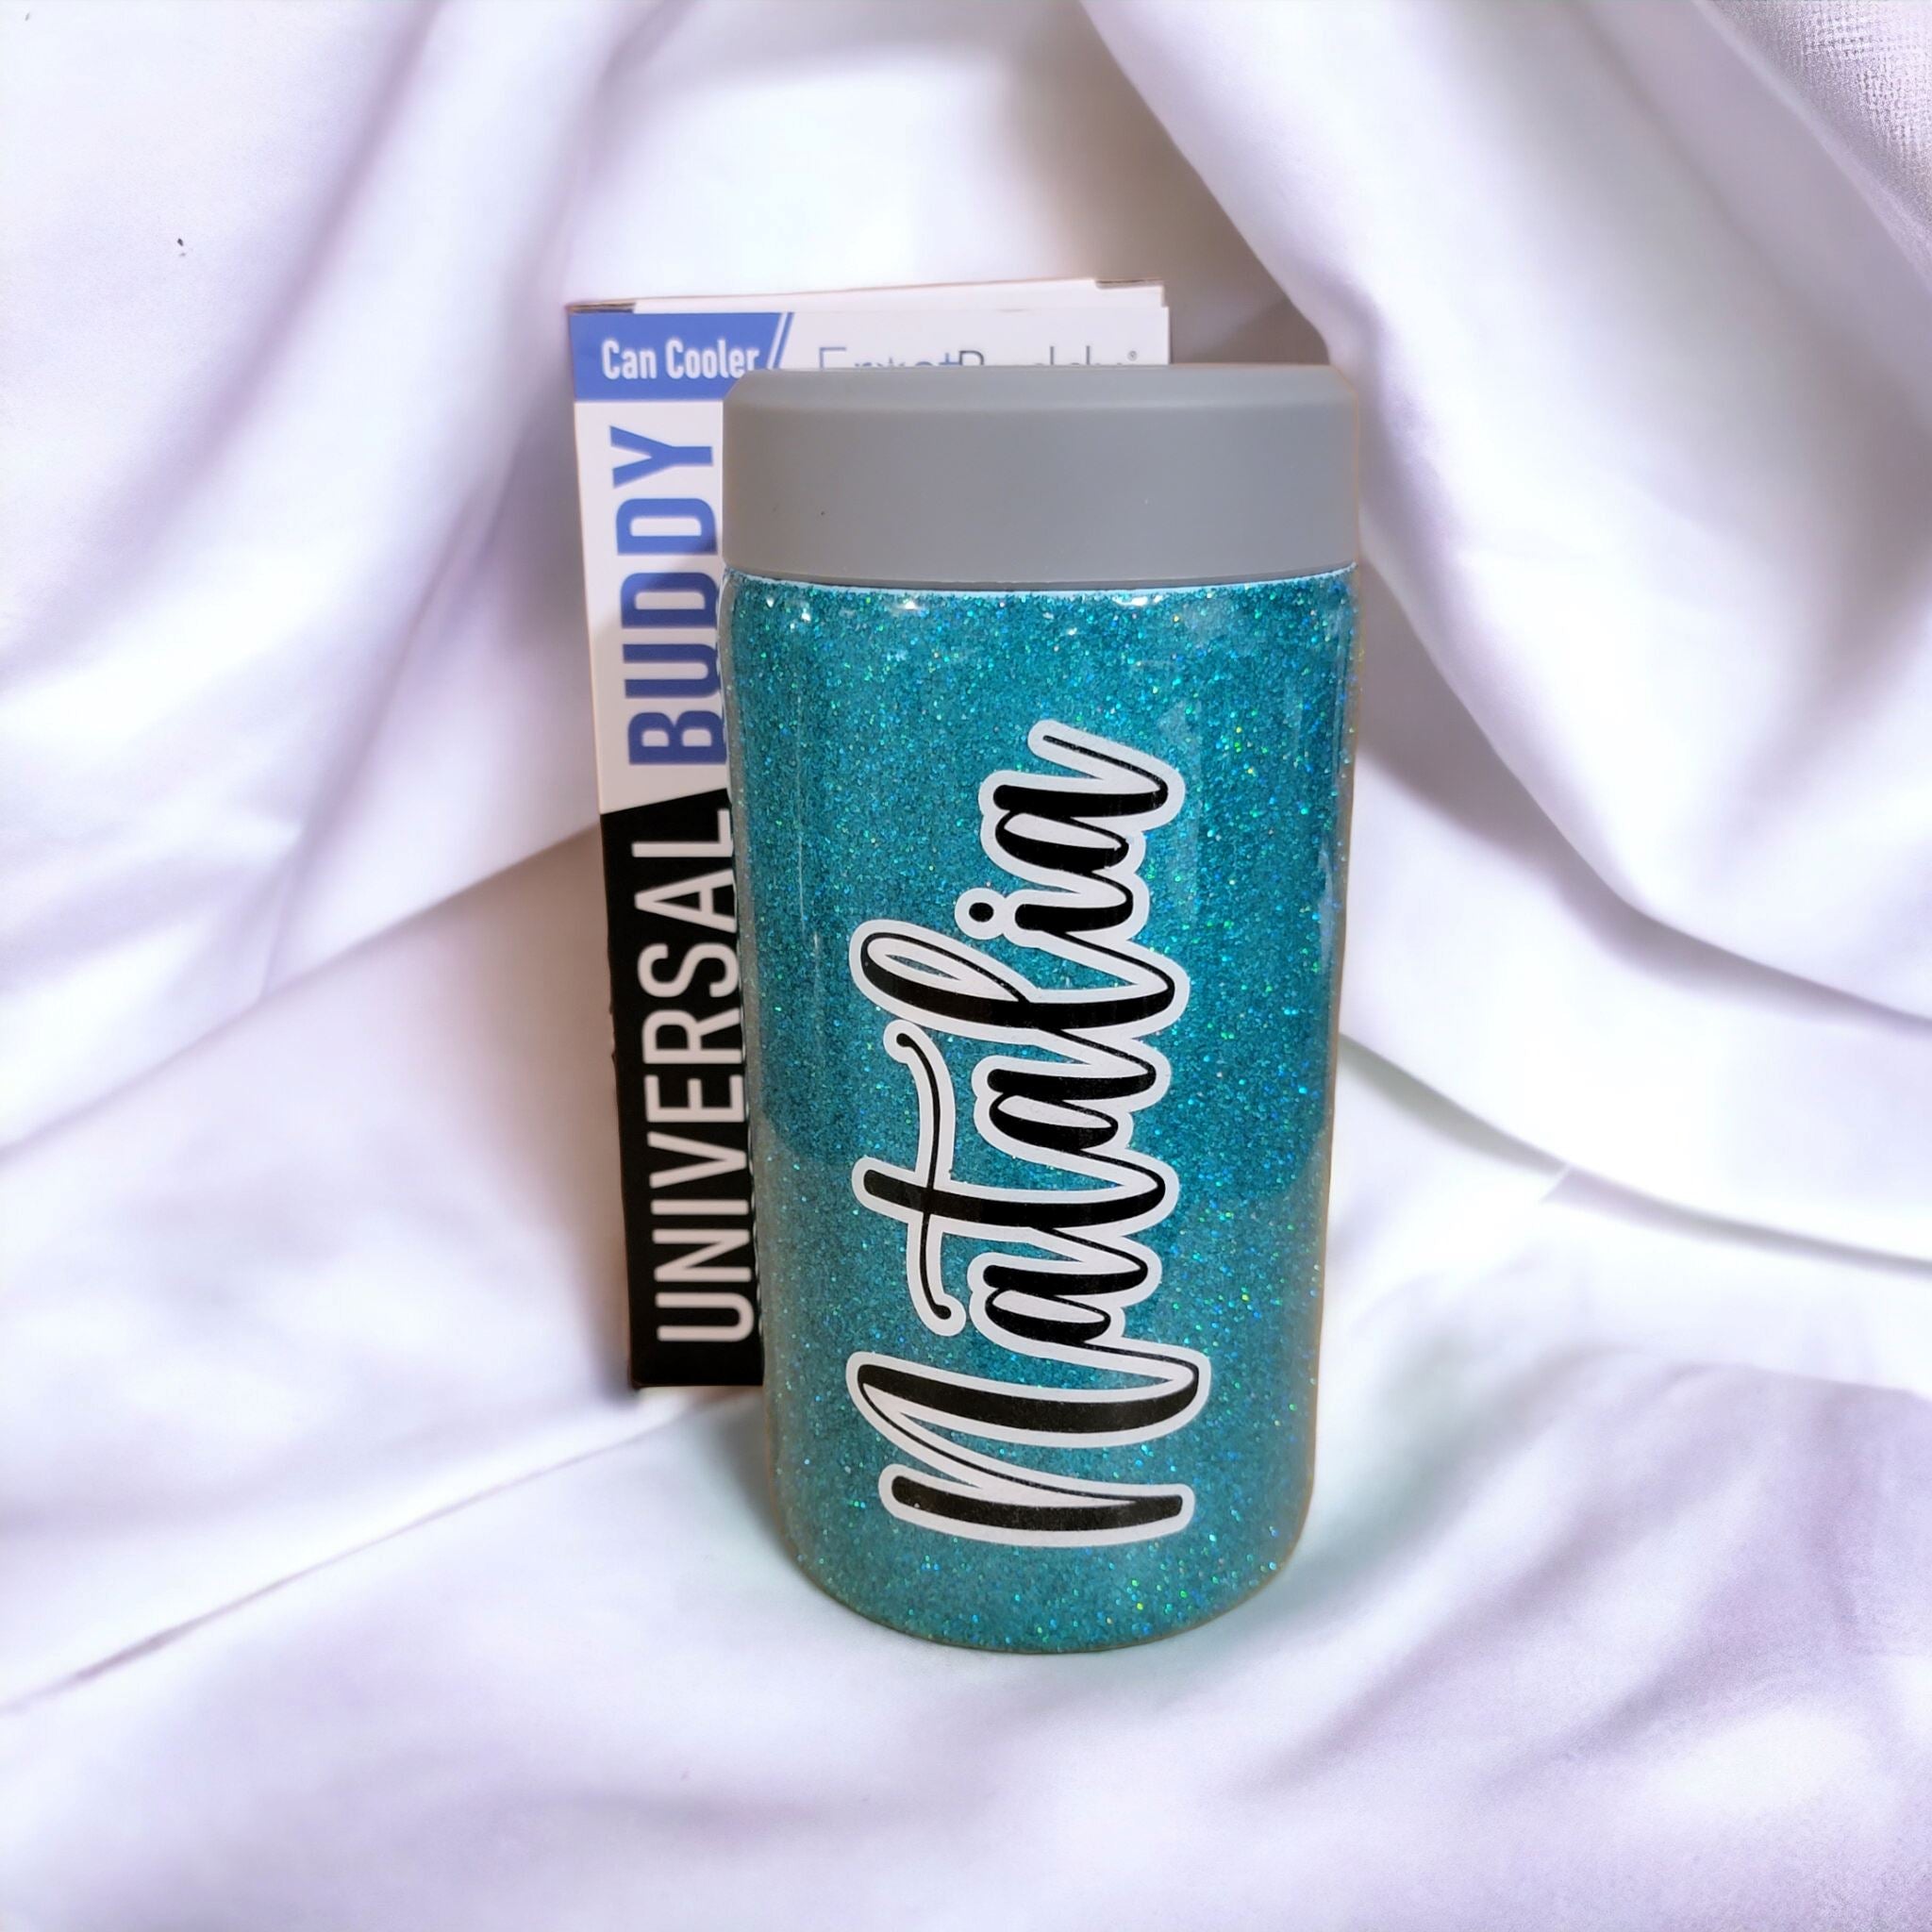 Universal Buddy 2.0 Can Cooler - The Simple Man